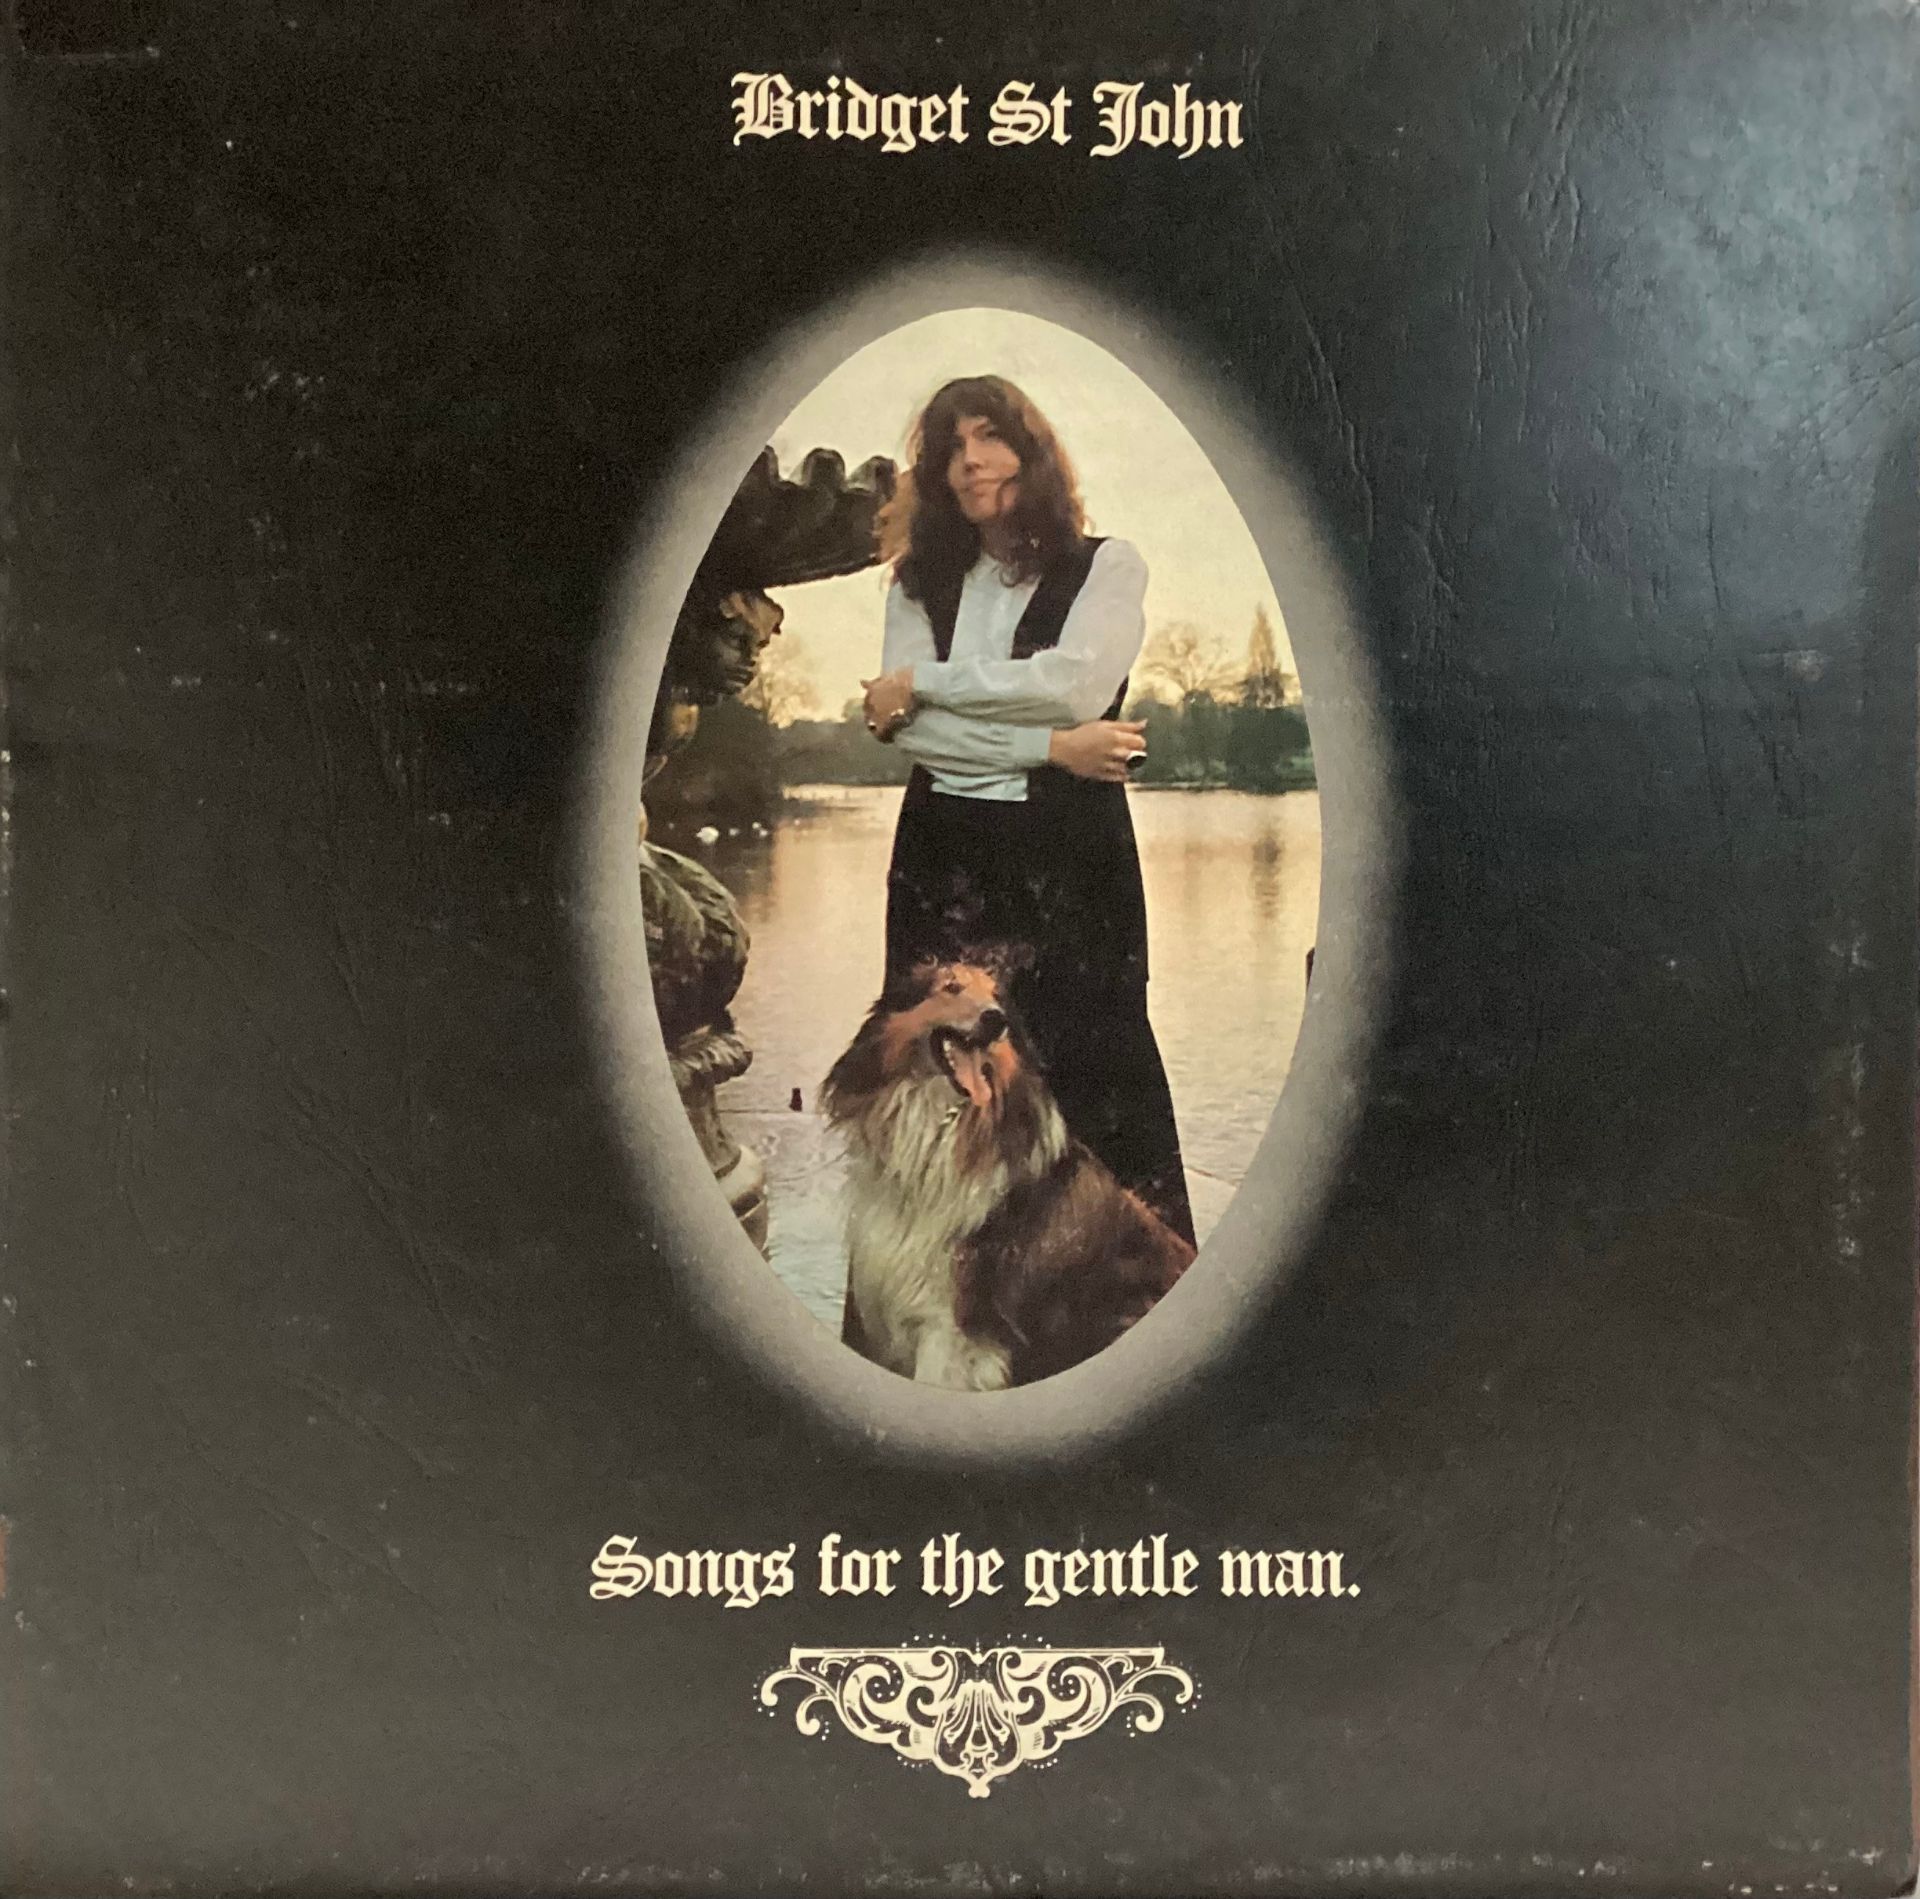 BRIGET St JOHN VINYL LP RECORD ‘SONGS FOR THE GENTLE MAN’. Bridget St John delivered three albums to